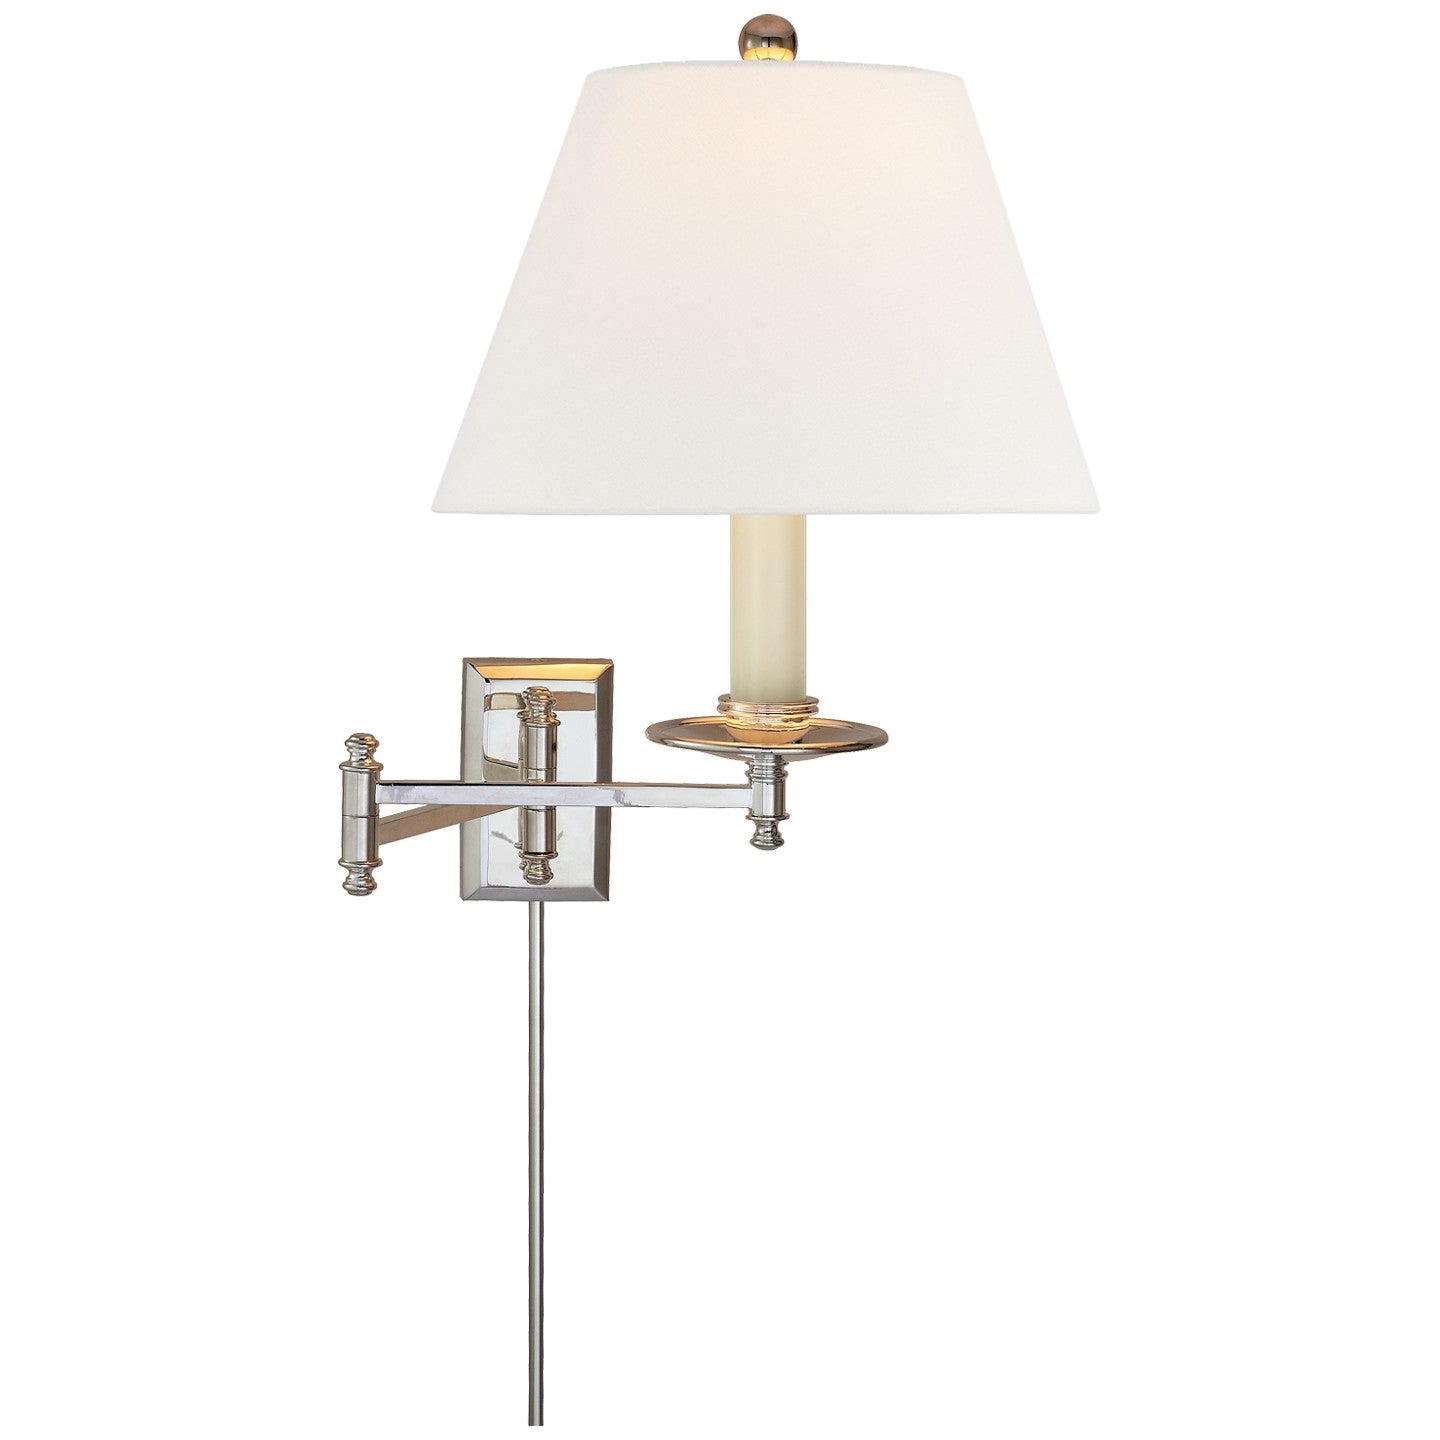 Visual Comfort Signature Canada - One Light Swing Arm Wall Sconce - Dorchester3 - Polished Nickel- Union Lighting Luminaires Decor